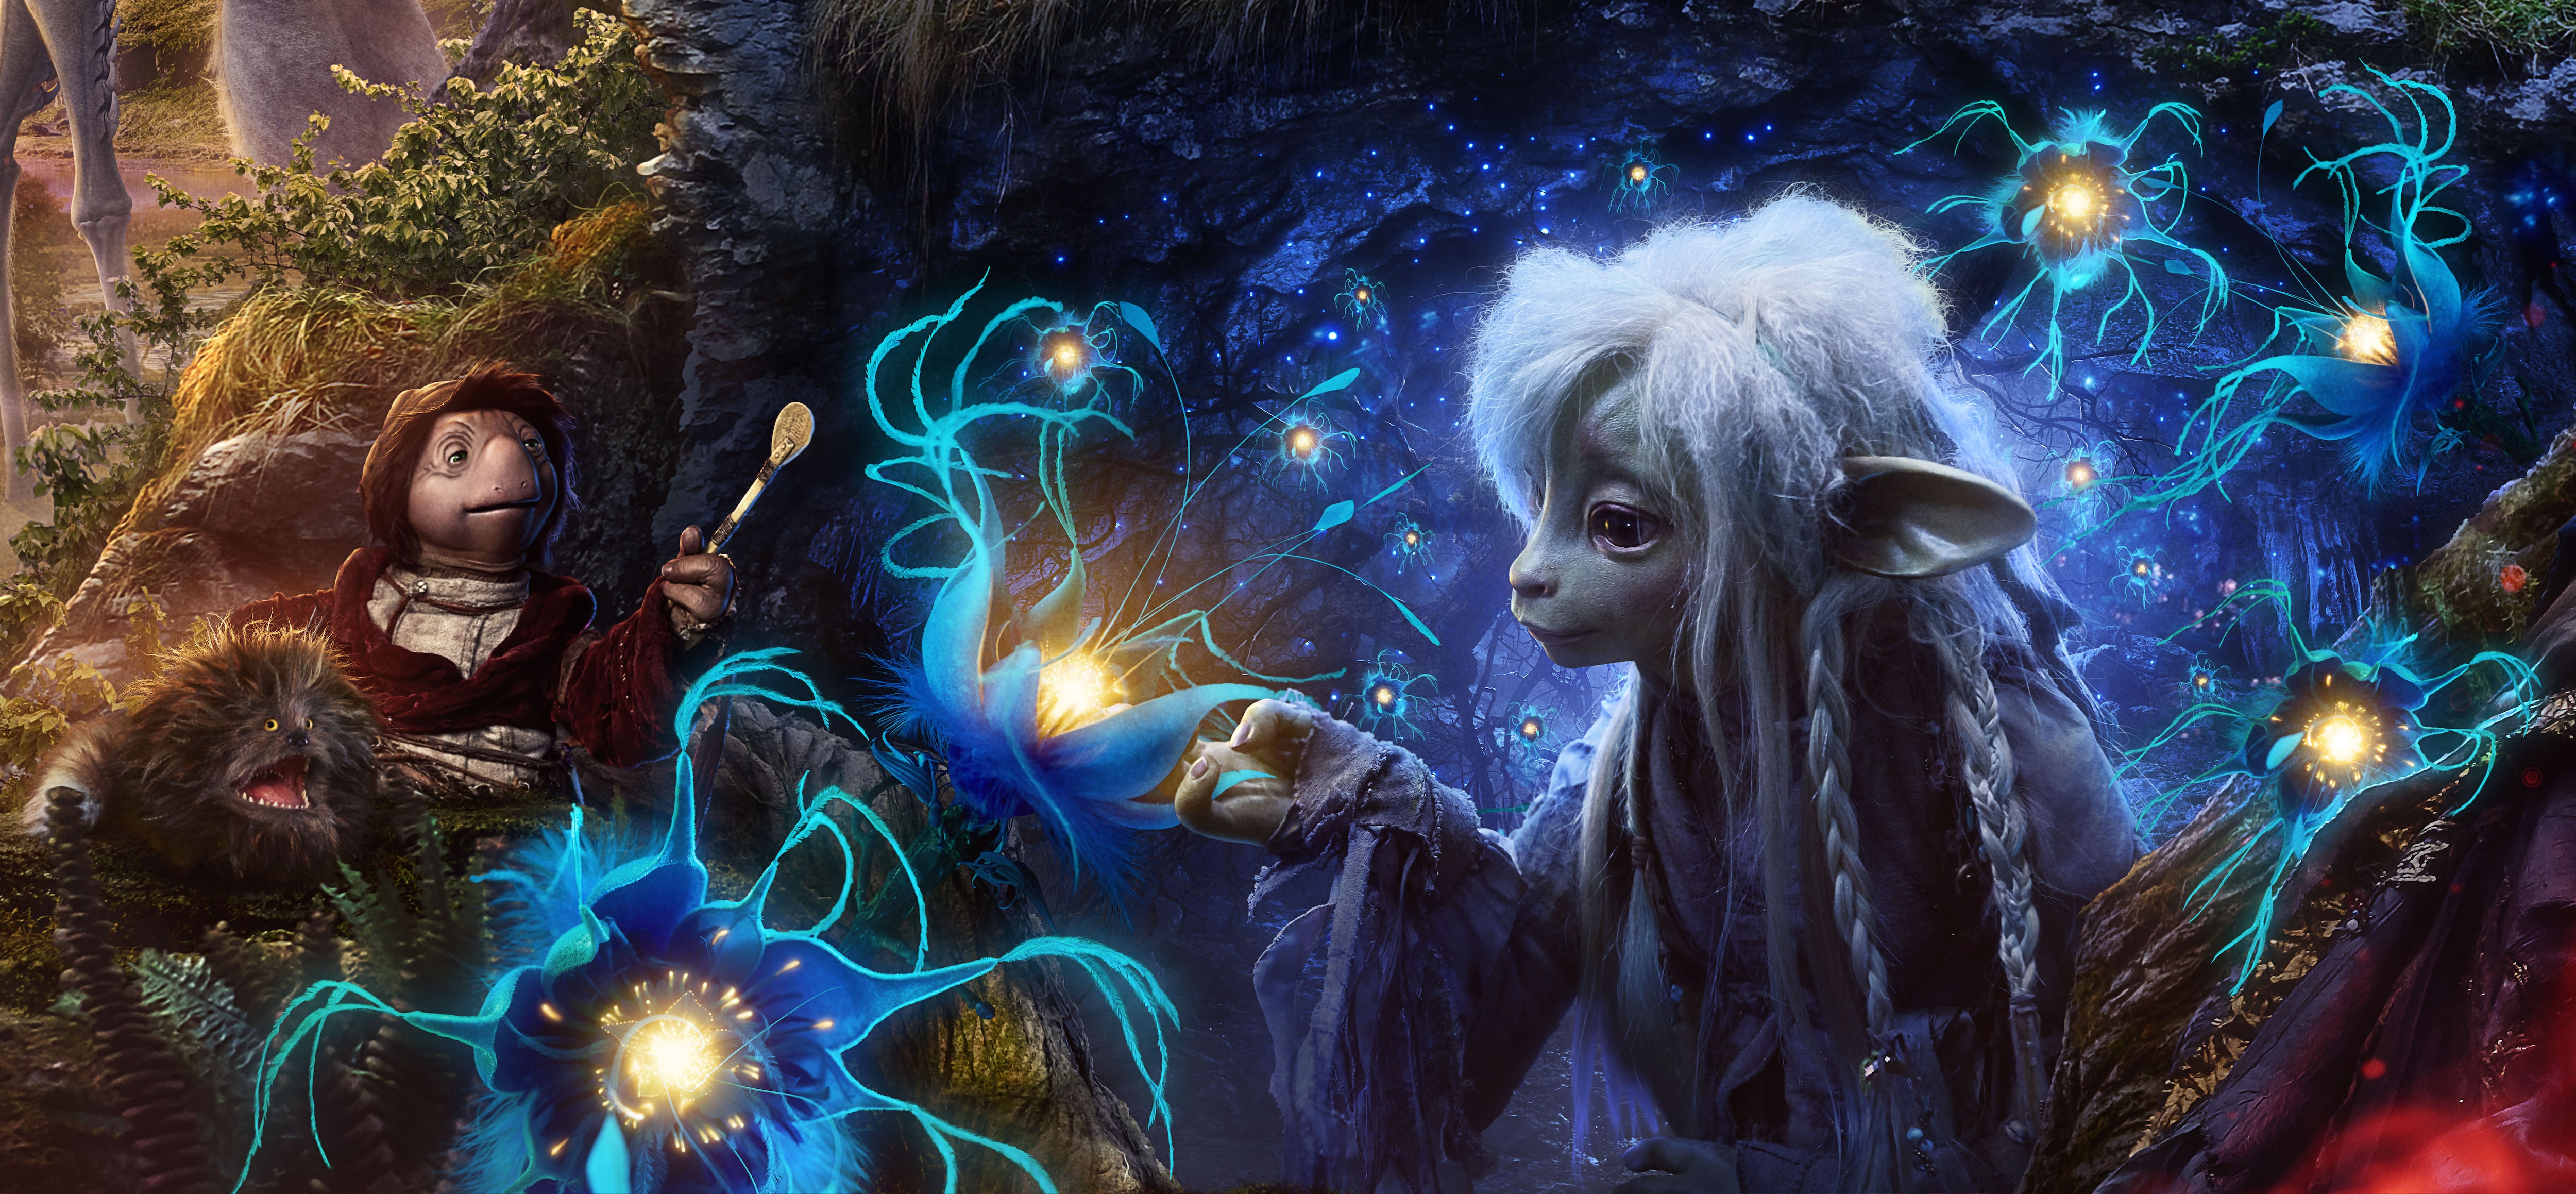 The Dark Crystal Age of Resistance on Netflix